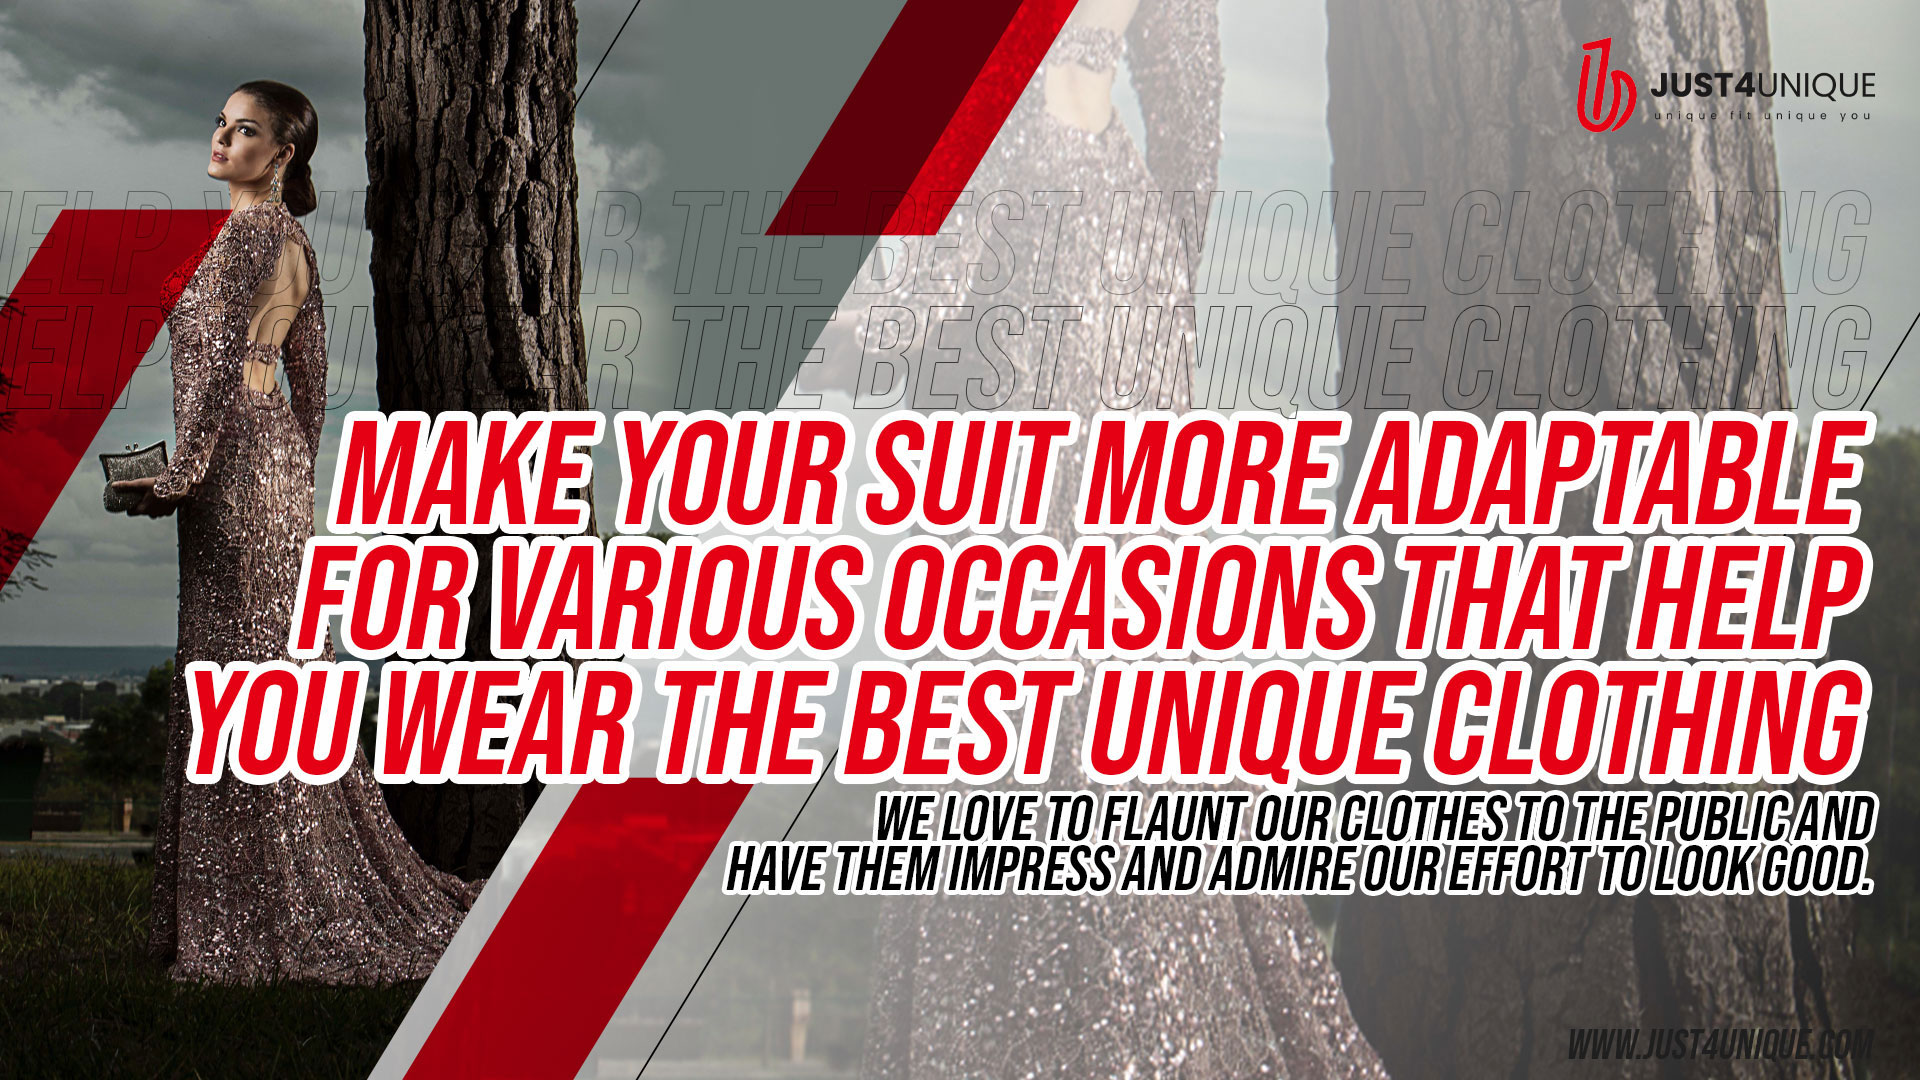 Make your suit more adaptable for various occasions